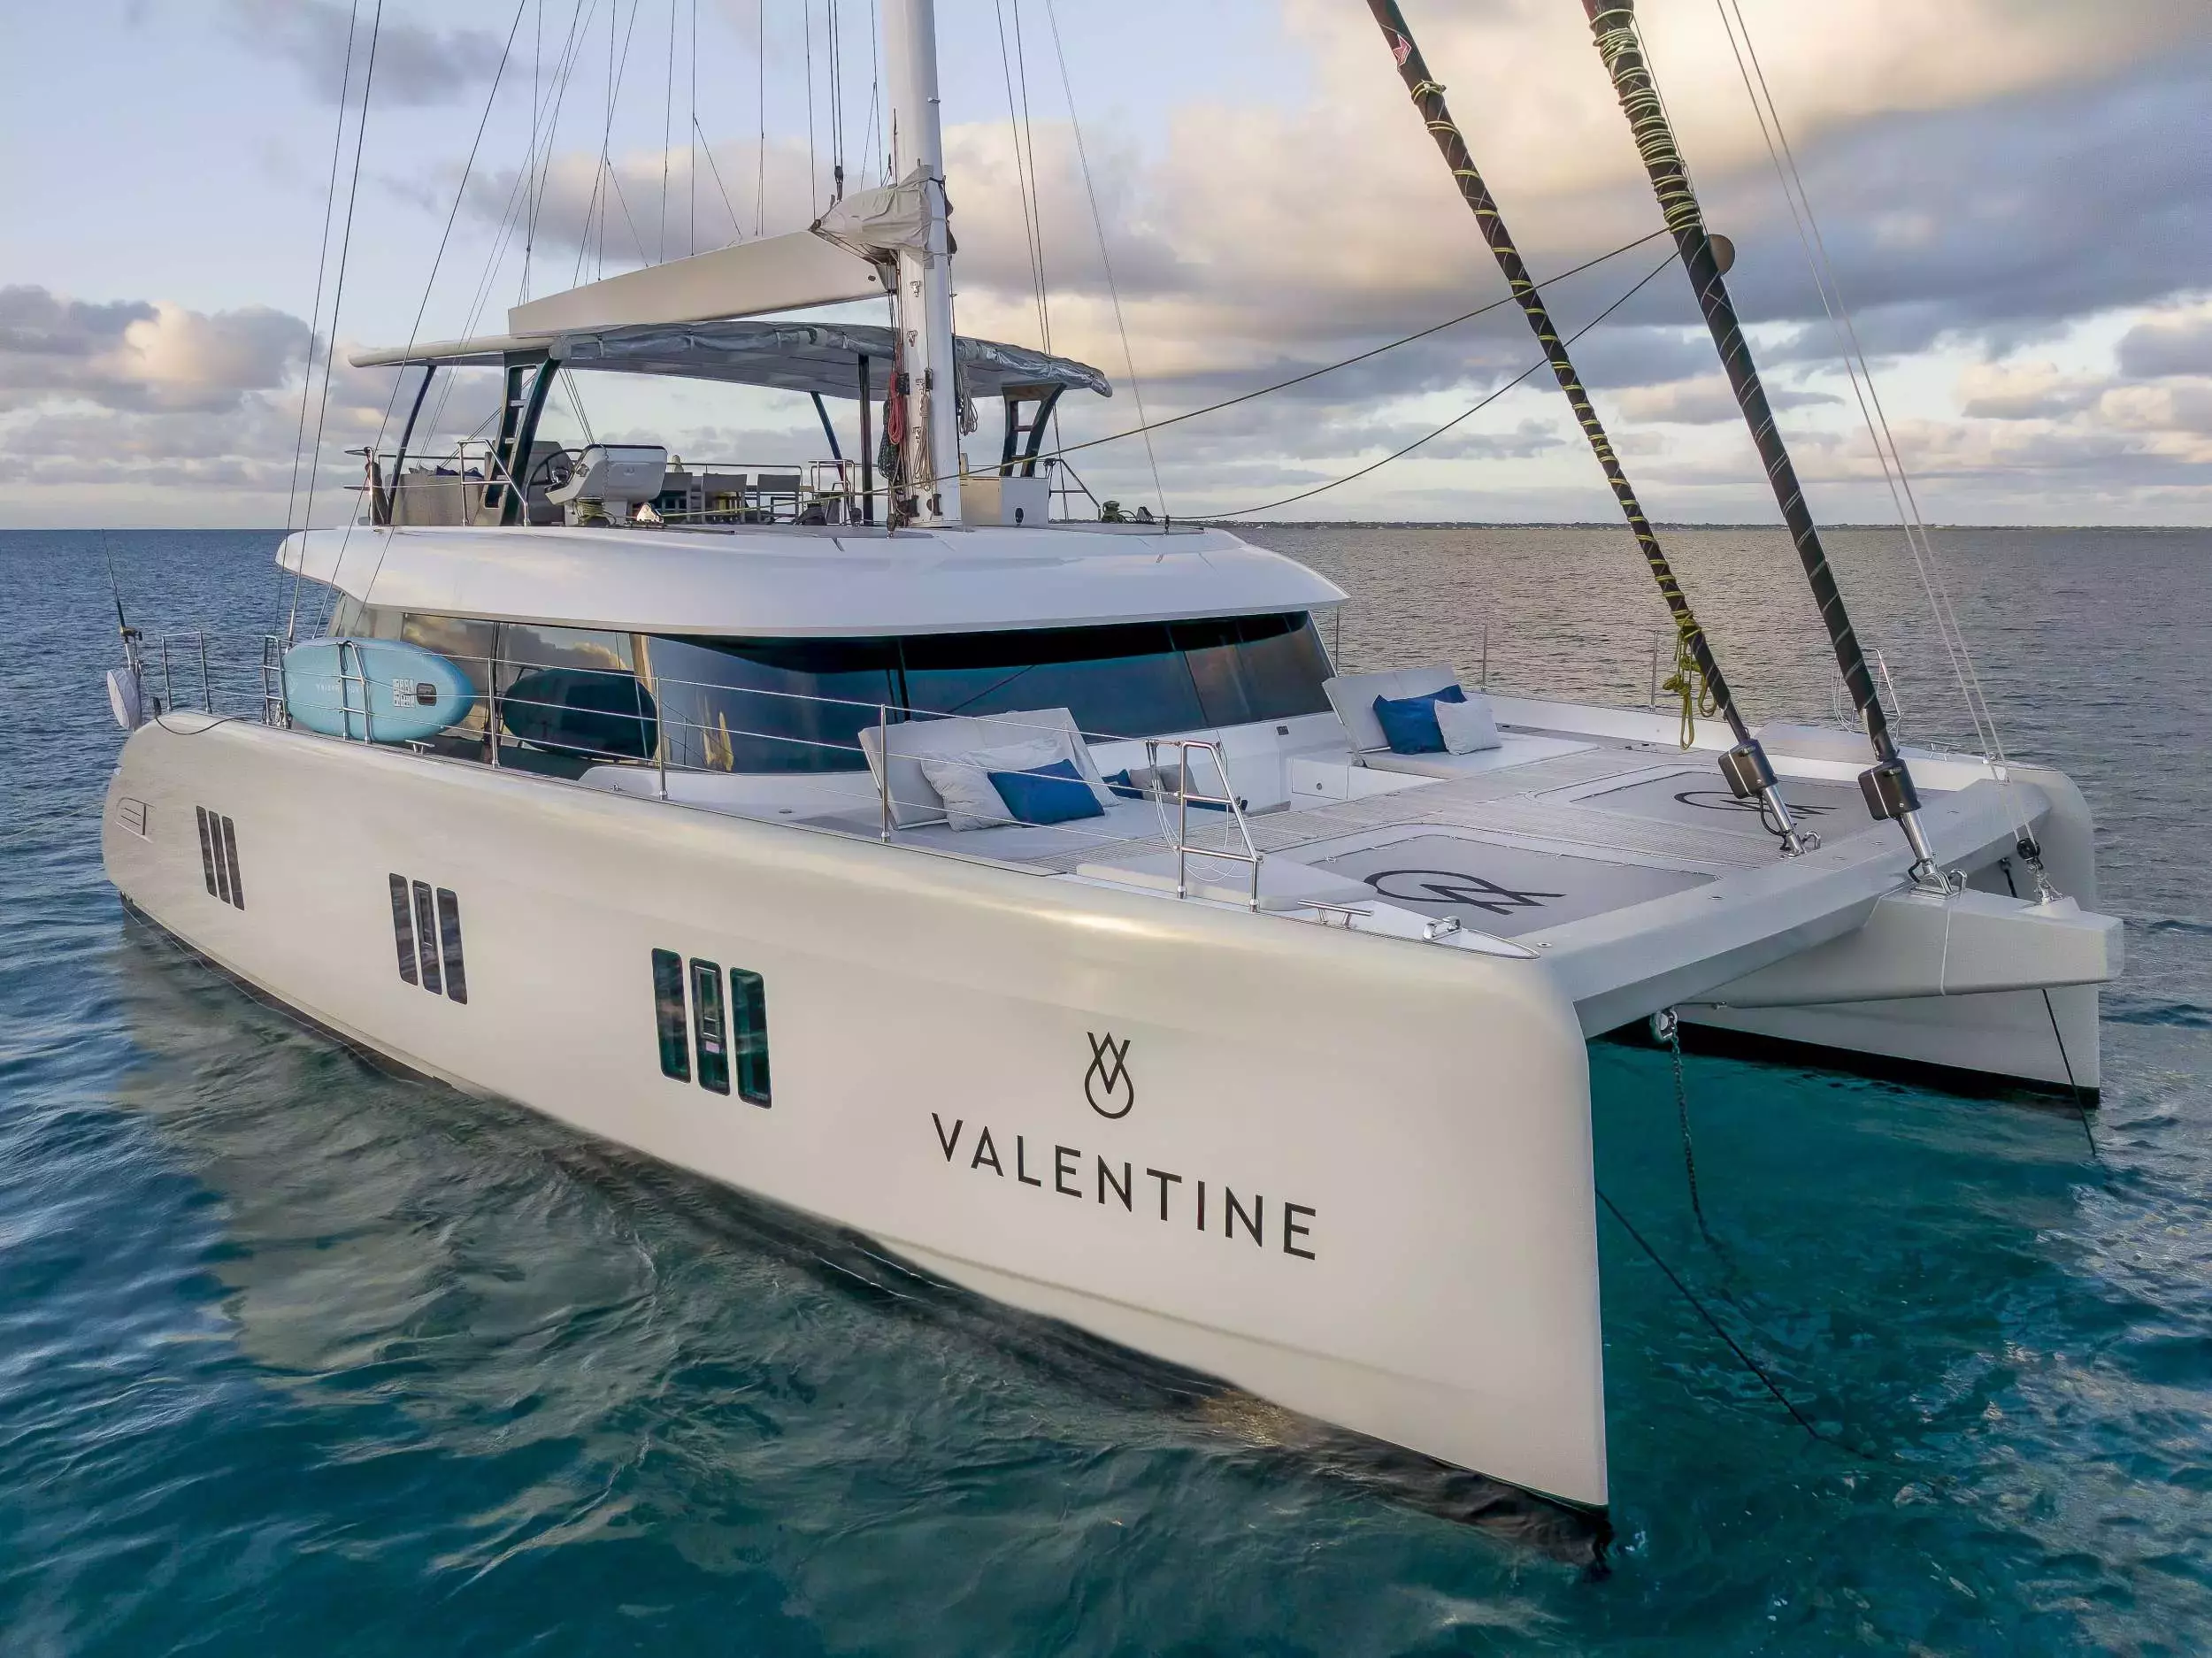 Valentine by Sunreef Yachts - Top rates for a Charter of a private Power Catamaran in British Virgin Islands